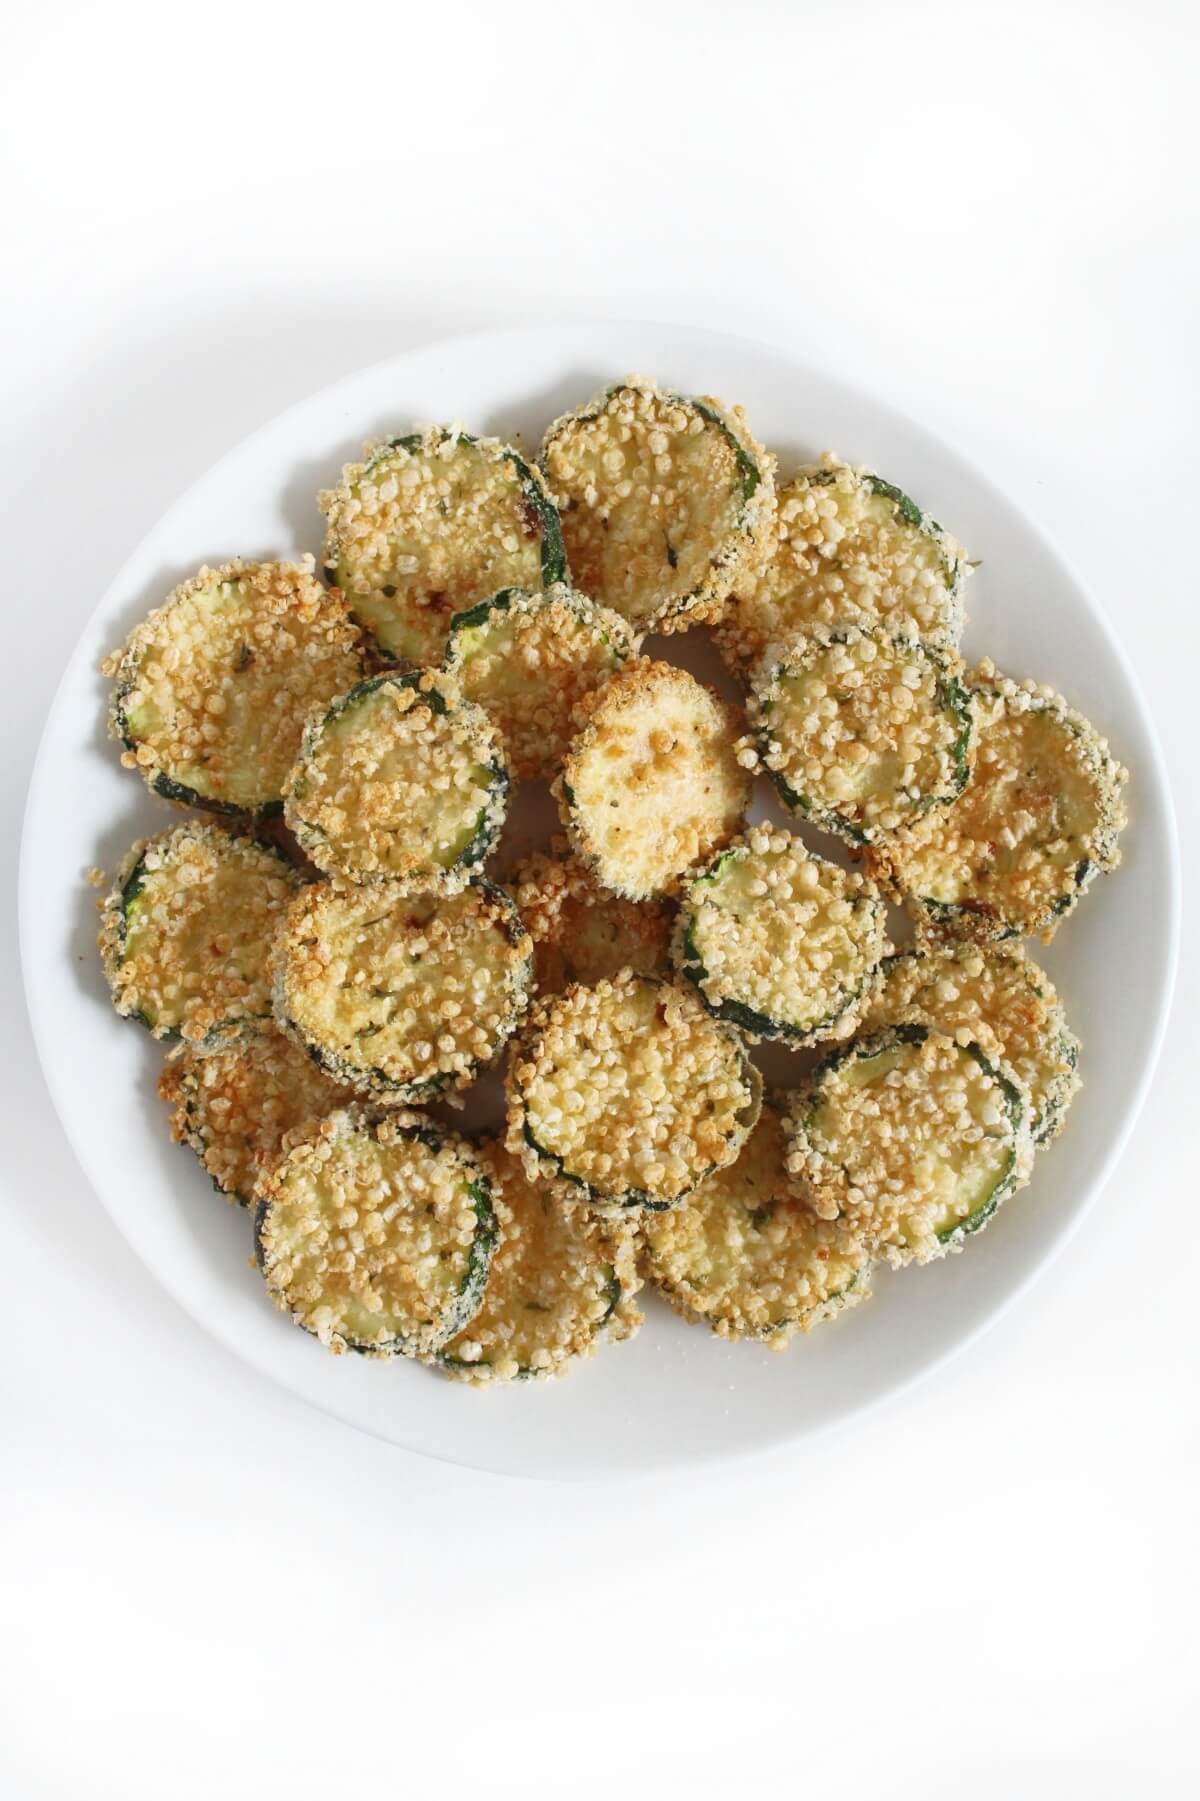 plate of plain breaded air fried zucchini chips